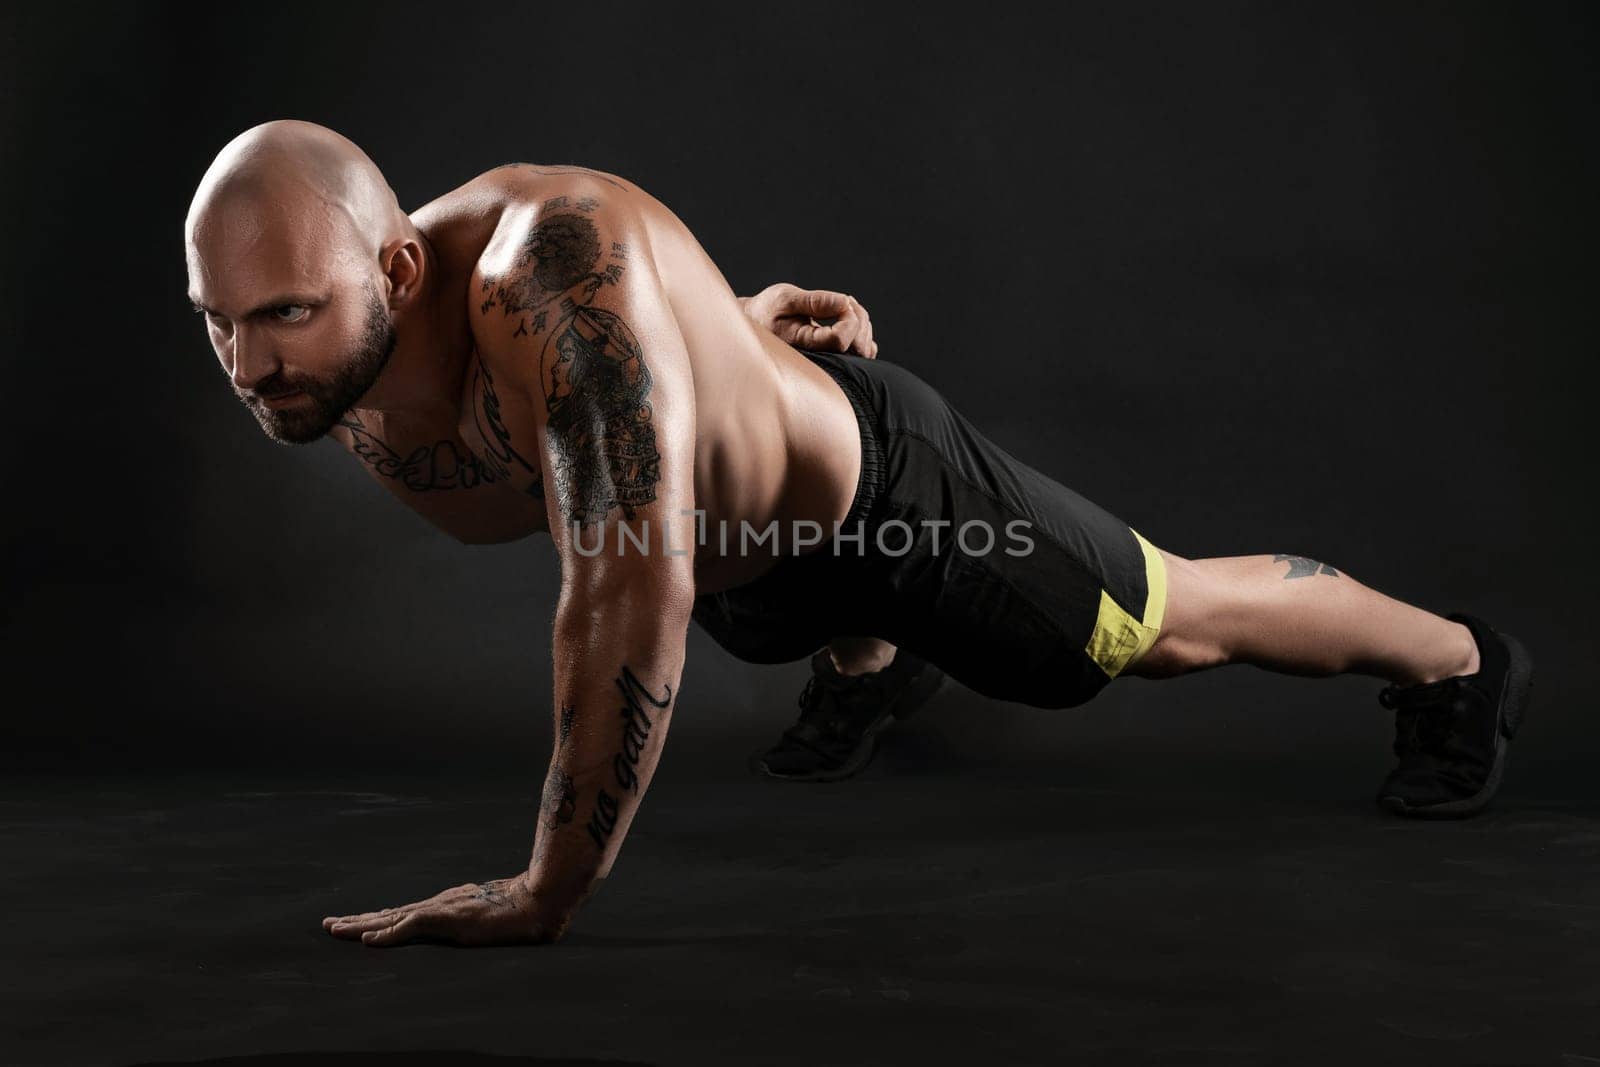 Masculine bald, bearded, tattooed man in black shorts and sneakers is pushing ups from the floor against a black background. Chic muscular body, fitness, gym, healthy lifestyle concept. Close-up portrait.